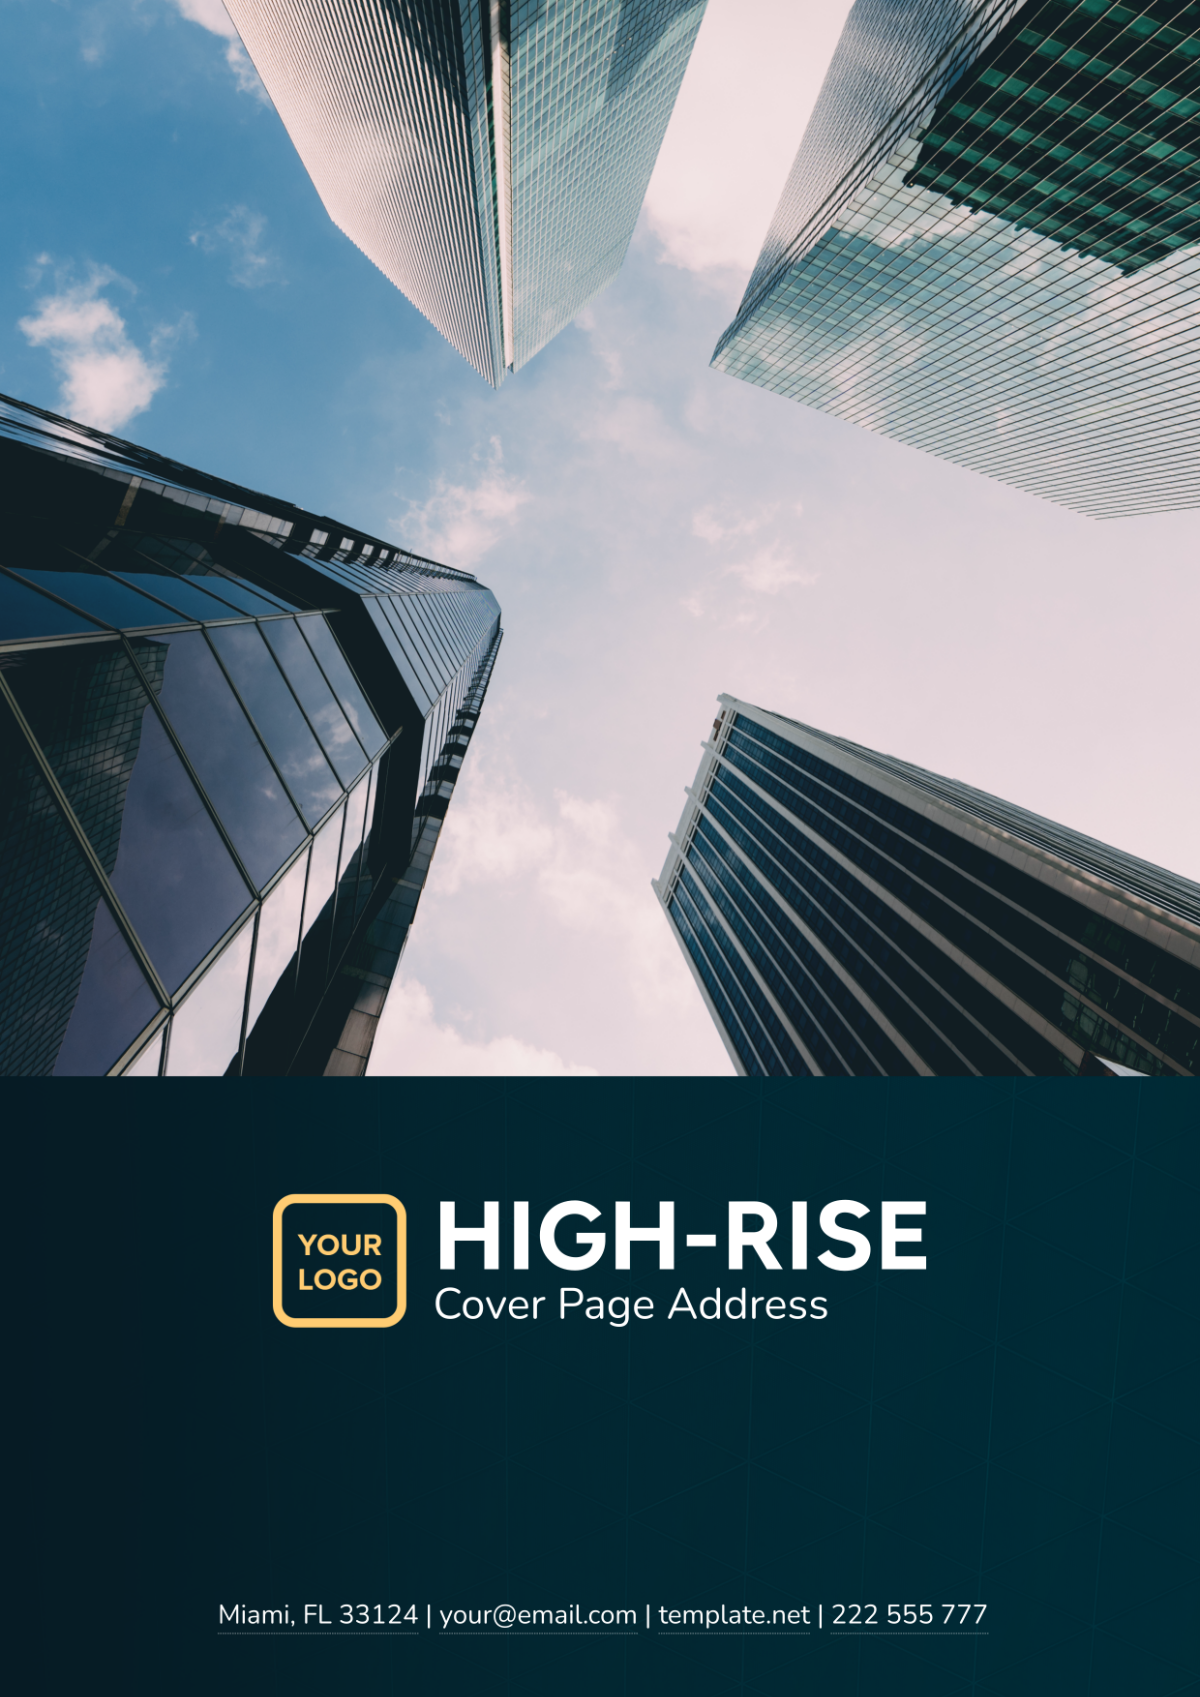 High-Rise Cover Page Address Template